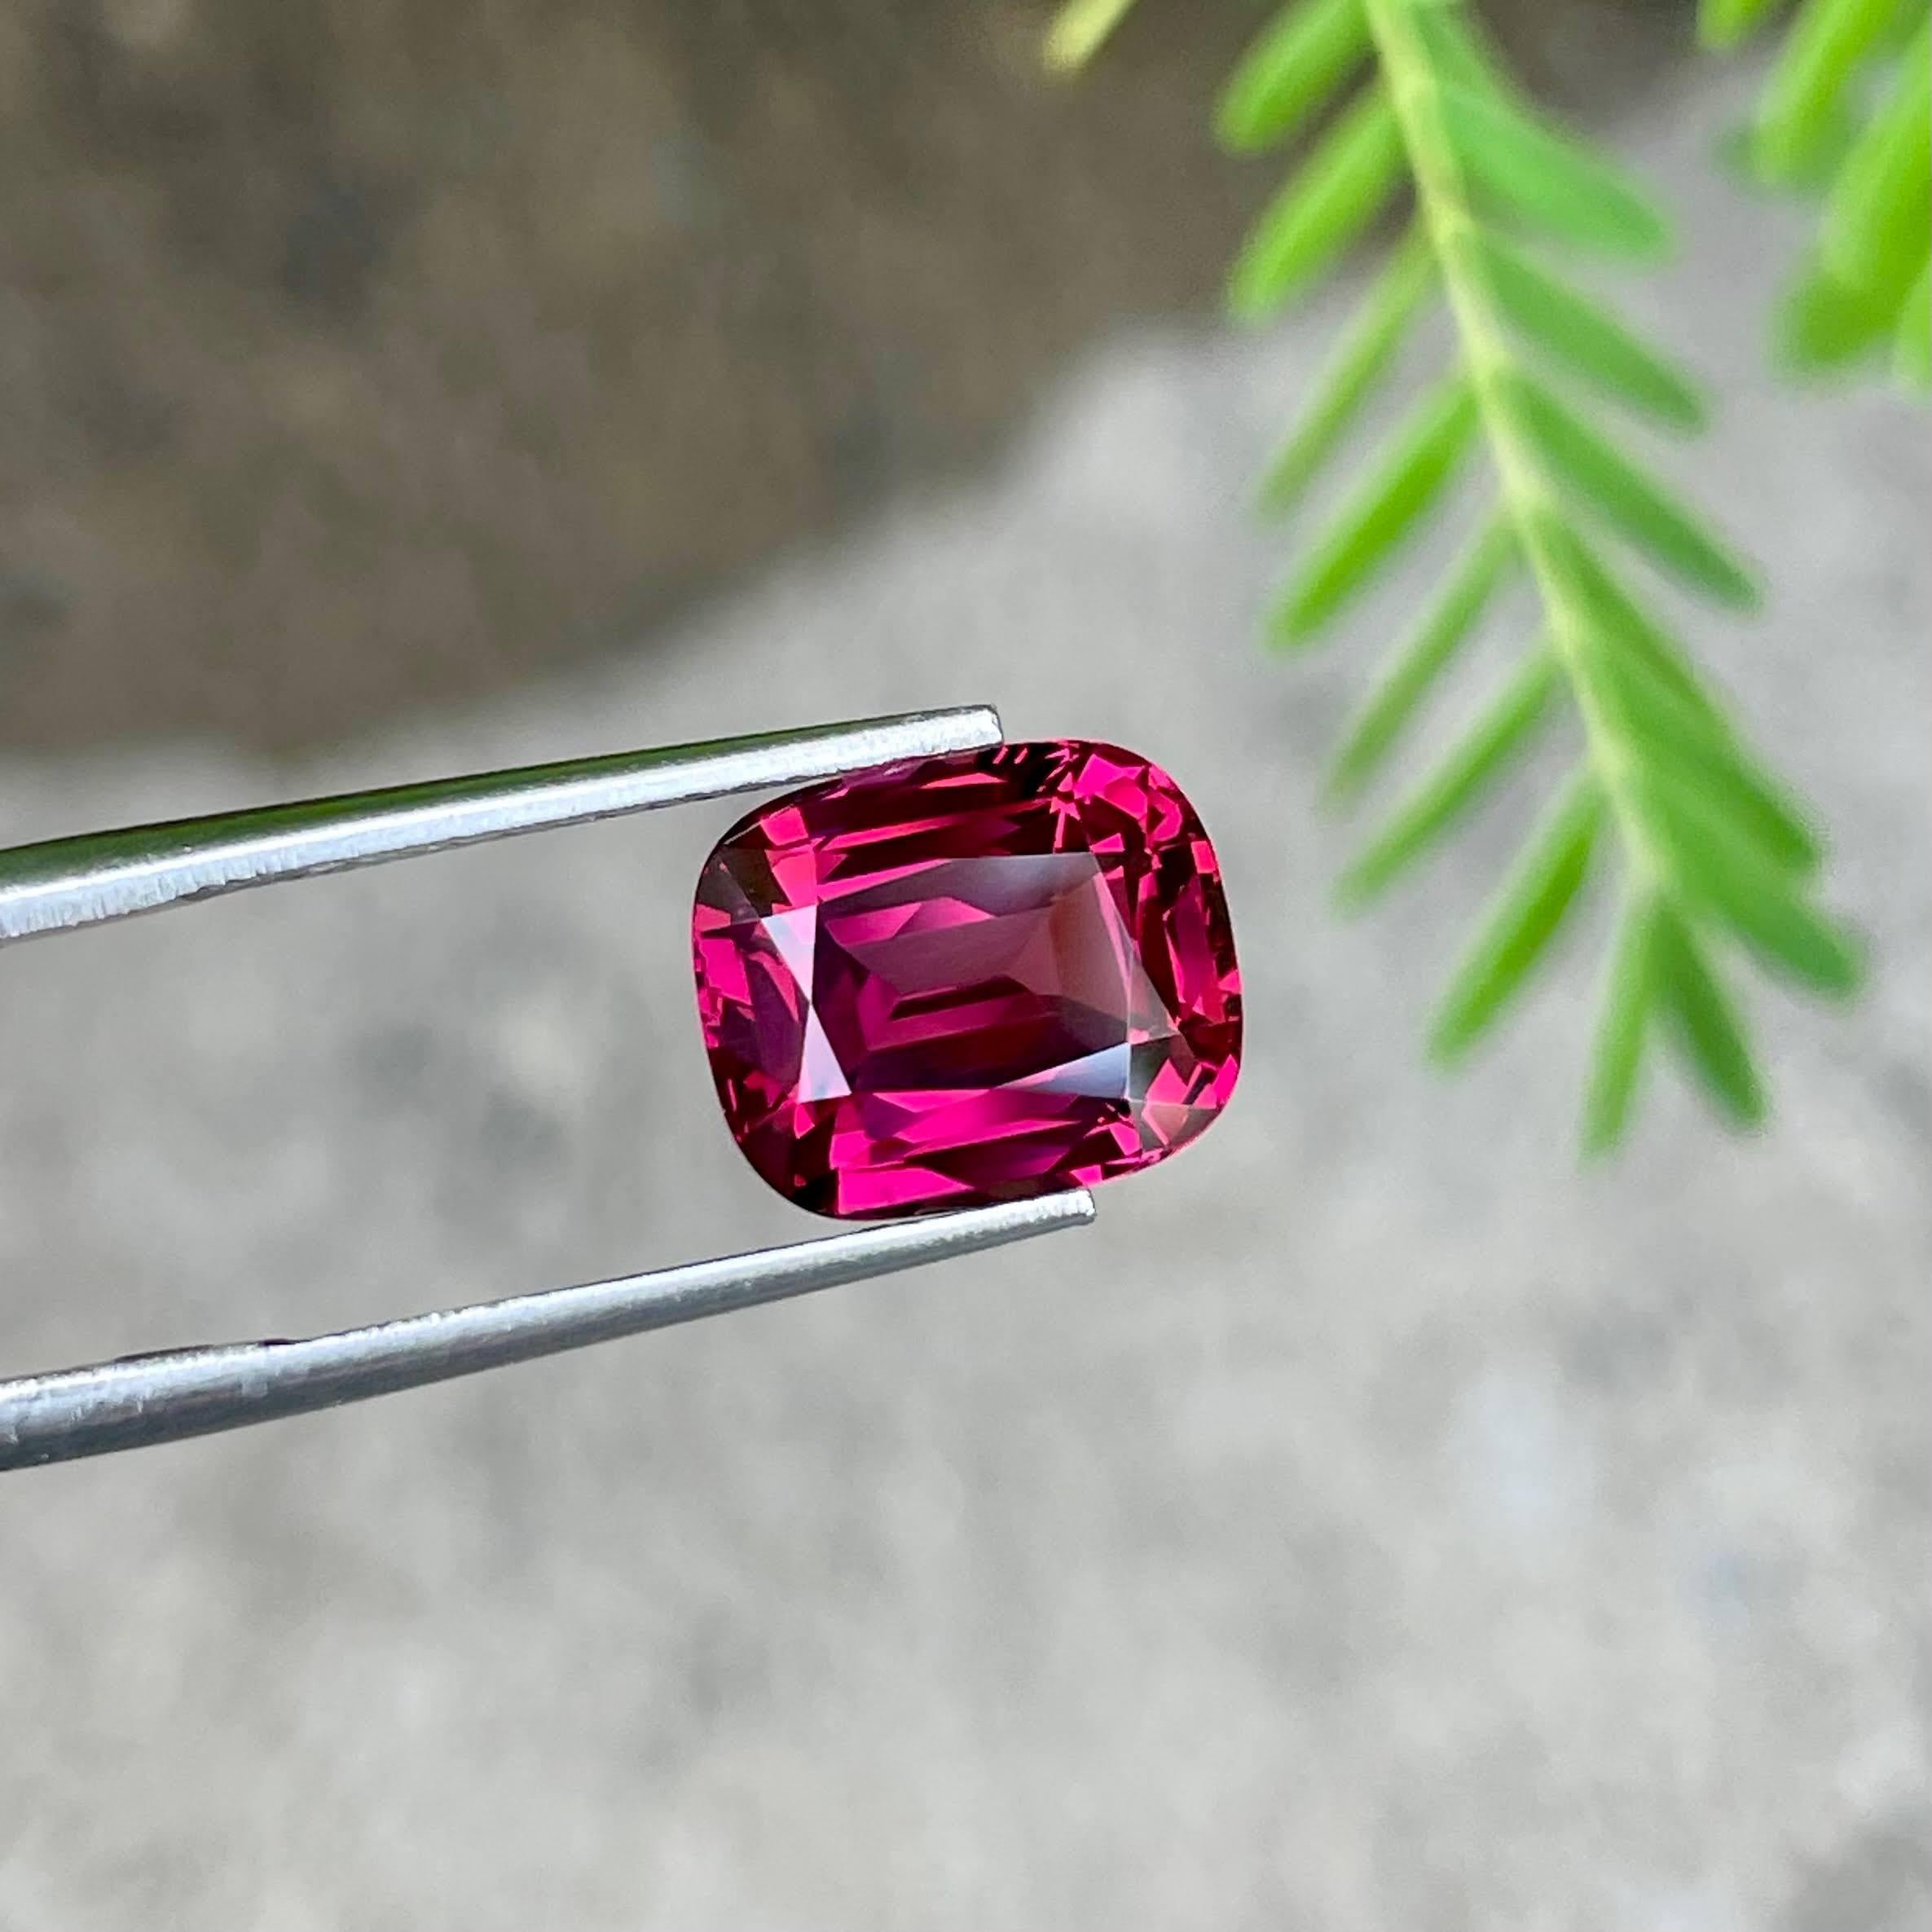 Weight 6.30 carats 
Dim 11.4x9.6x6.2 mm
Clarity Clean
Origin Tanzania
Treatment None
Cut Step Cushion
Shape Cushion




The 6.30 carats Pinkish Red Garnet is a mesmerizing gemstone known for its exceptional beauty and striking coloration.